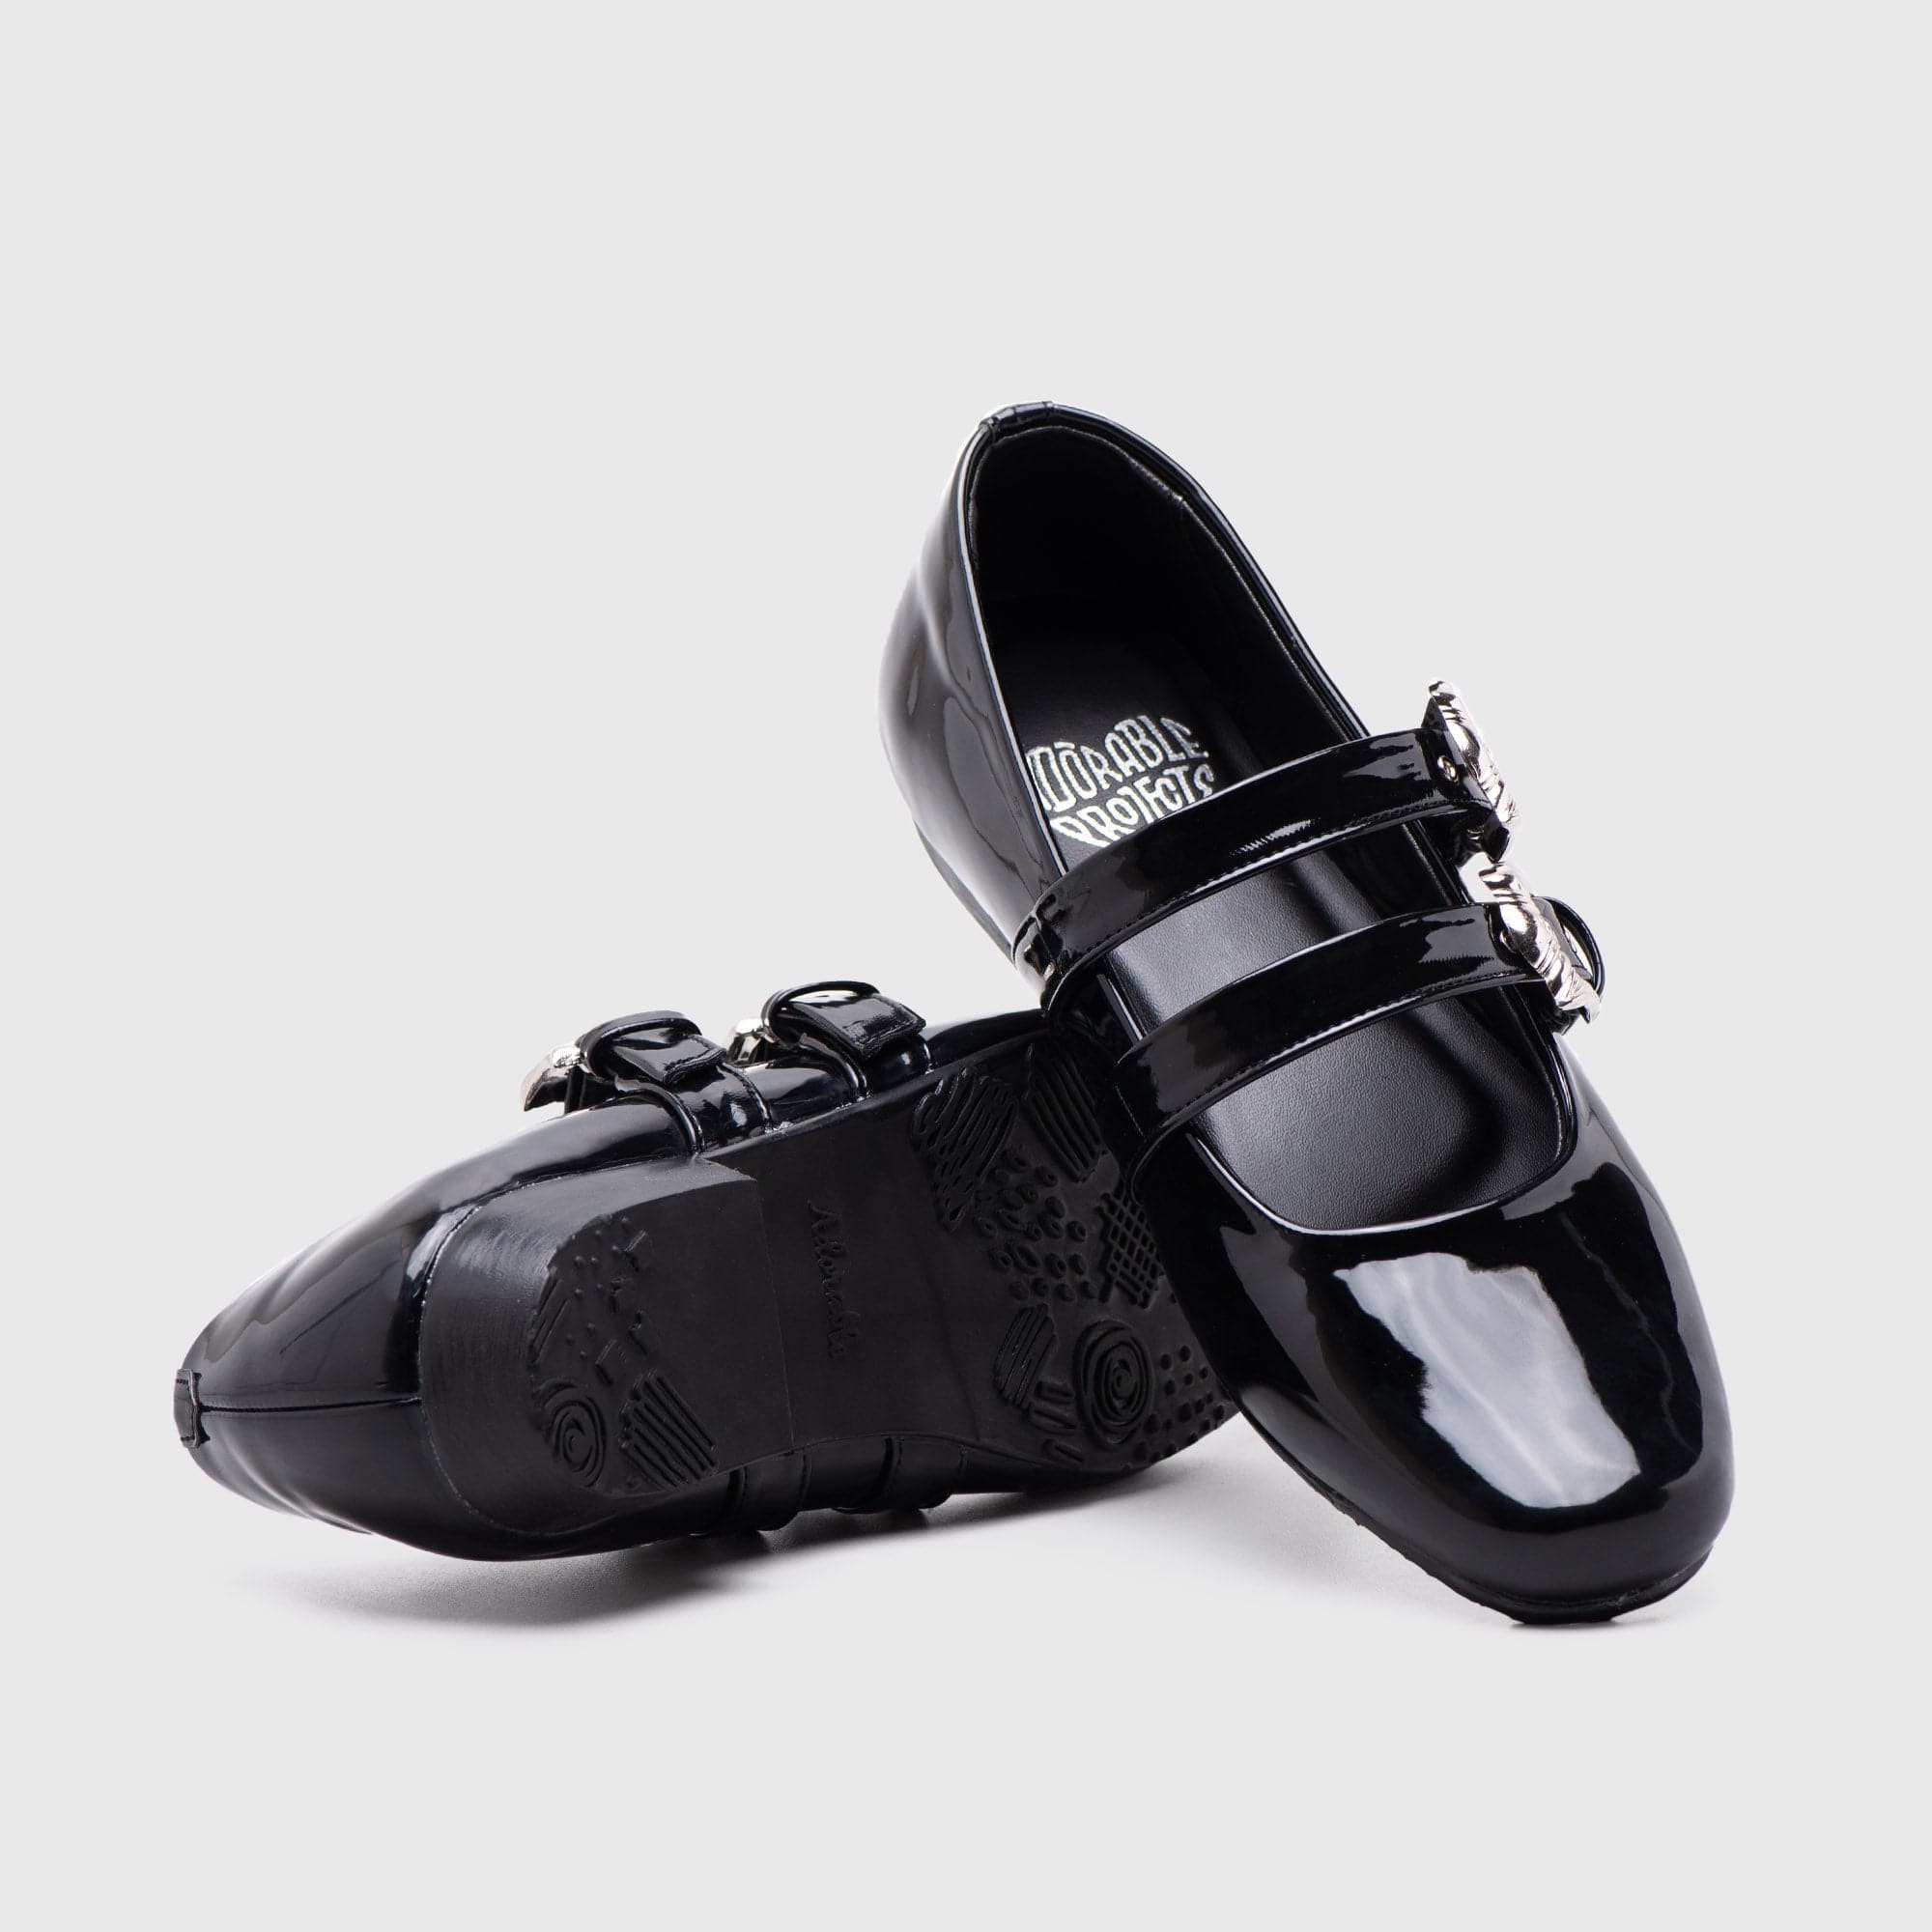 Adorable Projects Official Adorableprojects - Baleva Flat Shoes Black - Sepatu Wanita